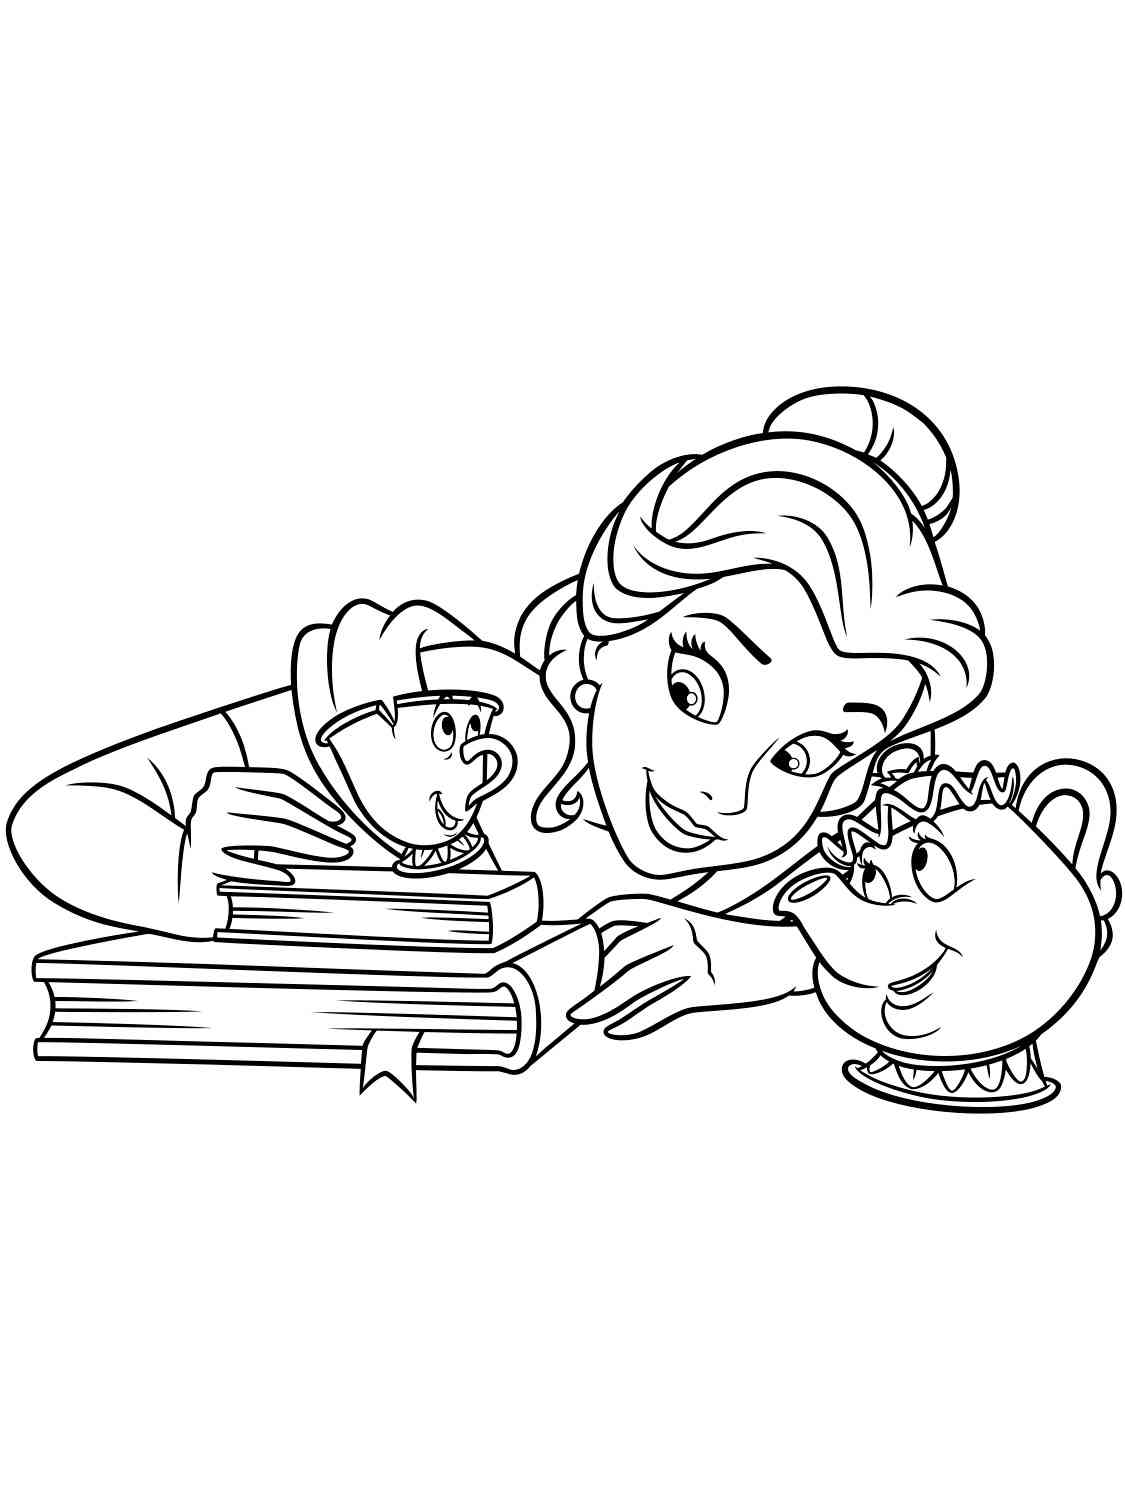 Belle with Chip and Mrs. Potts coloring page